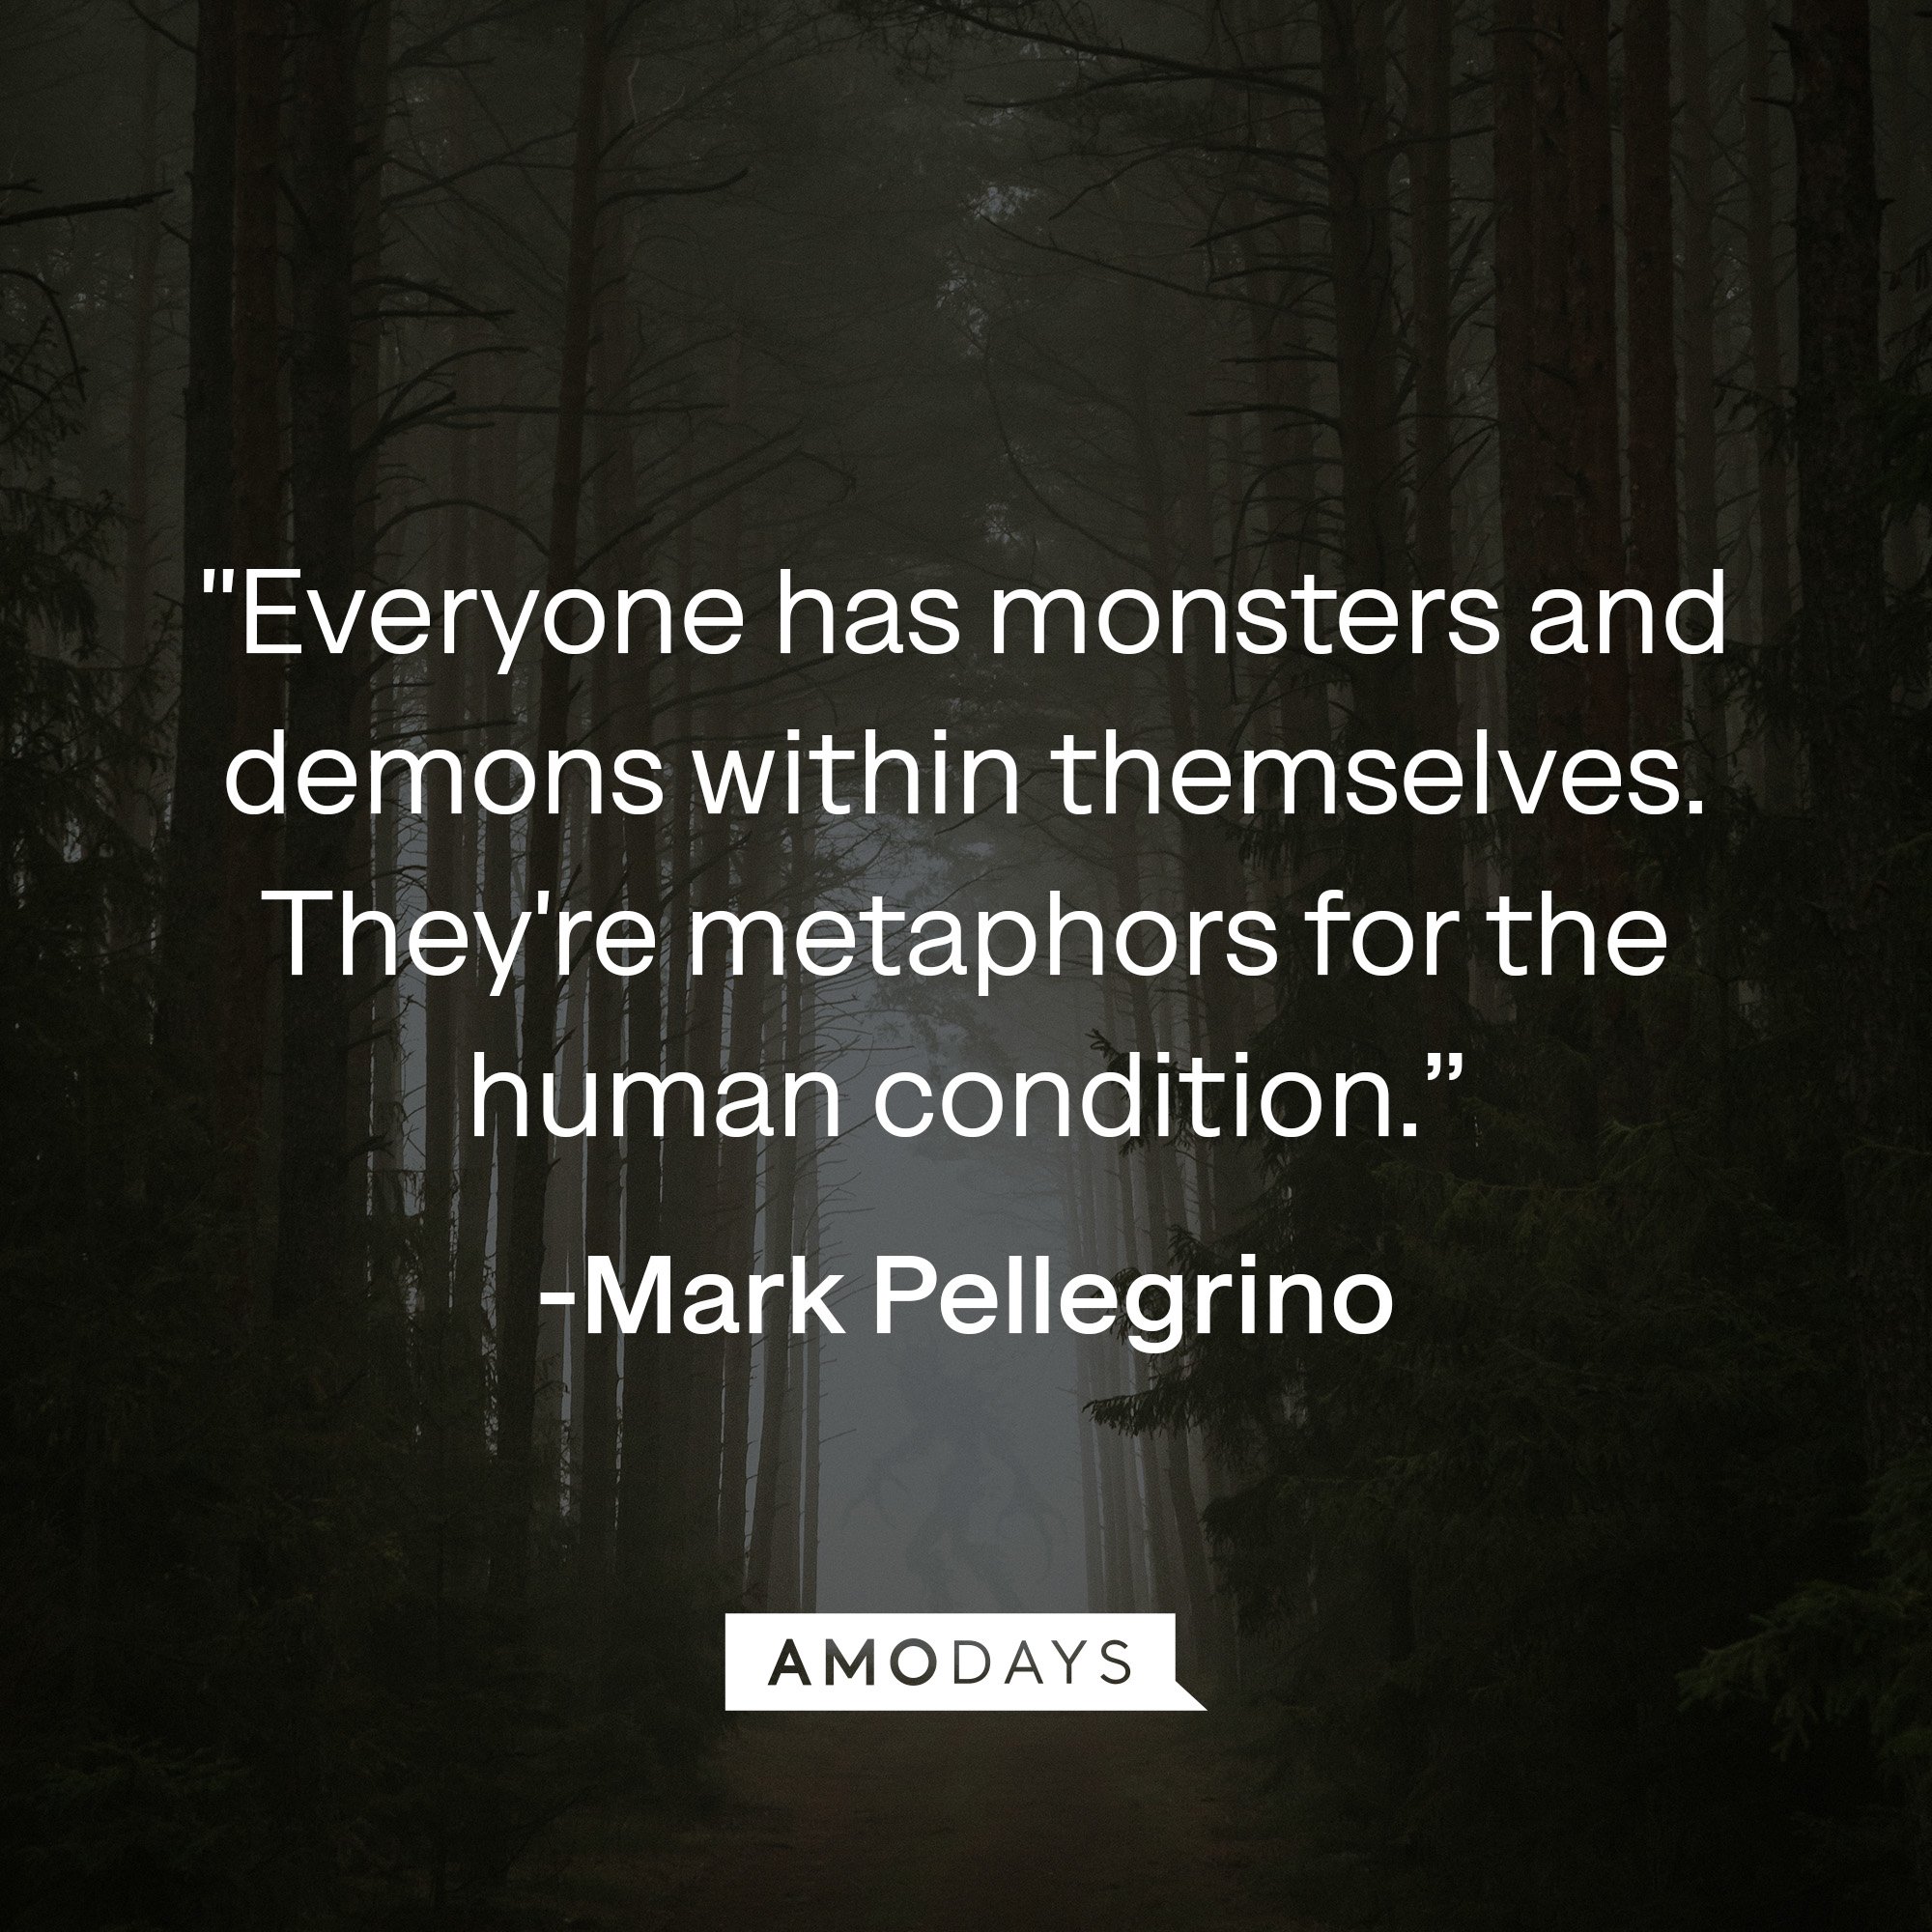 Mark Pellegrino’s quote: "Everyone has monsters and demons within themselves. They're metaphors for the human condition." | Image: AmoDays